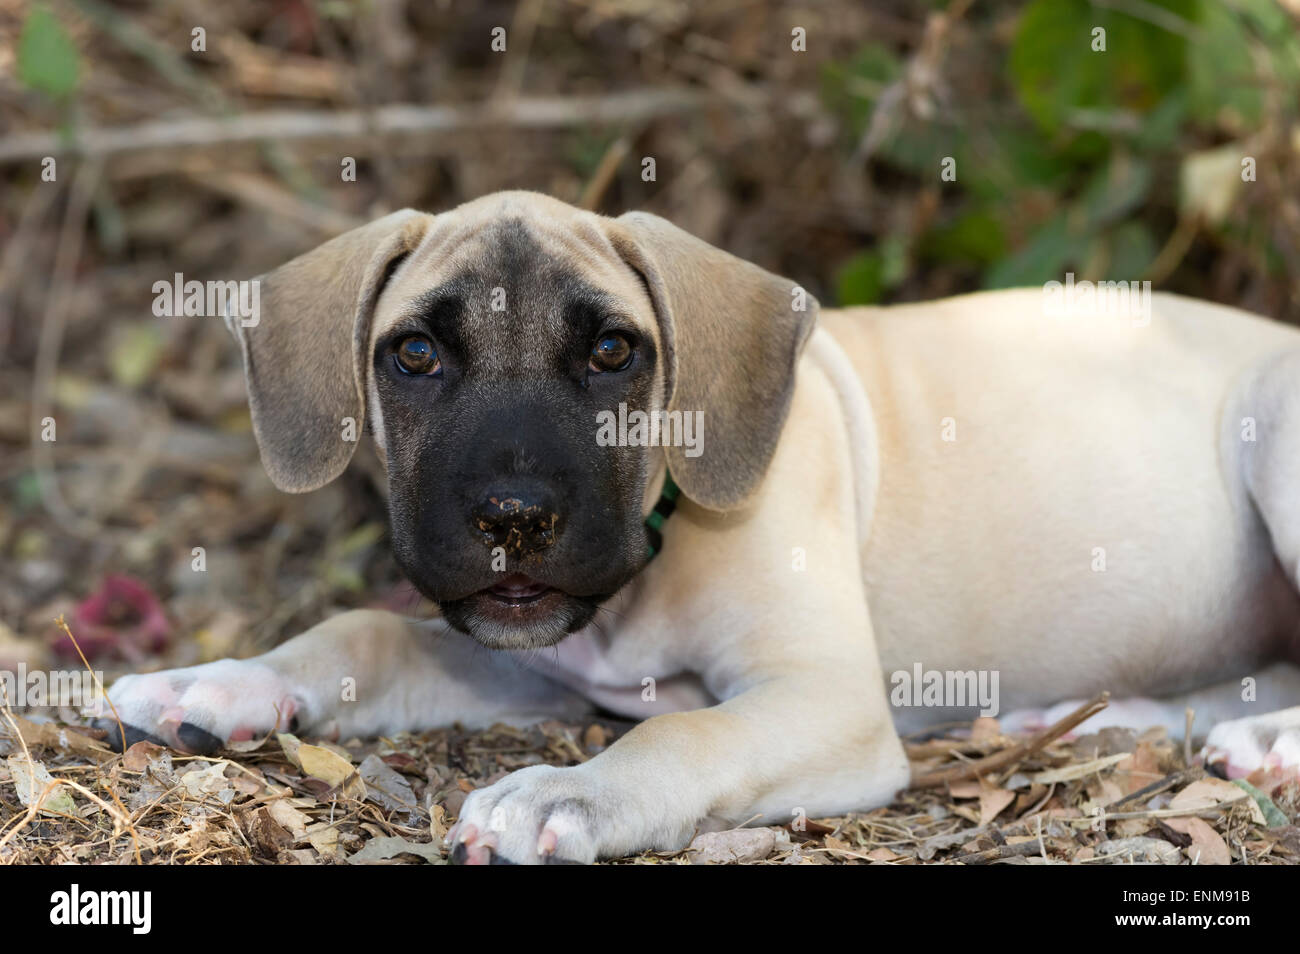 A big eyed big eared puppy with dirt on its nose is looking striaght ahead. Stock Photo